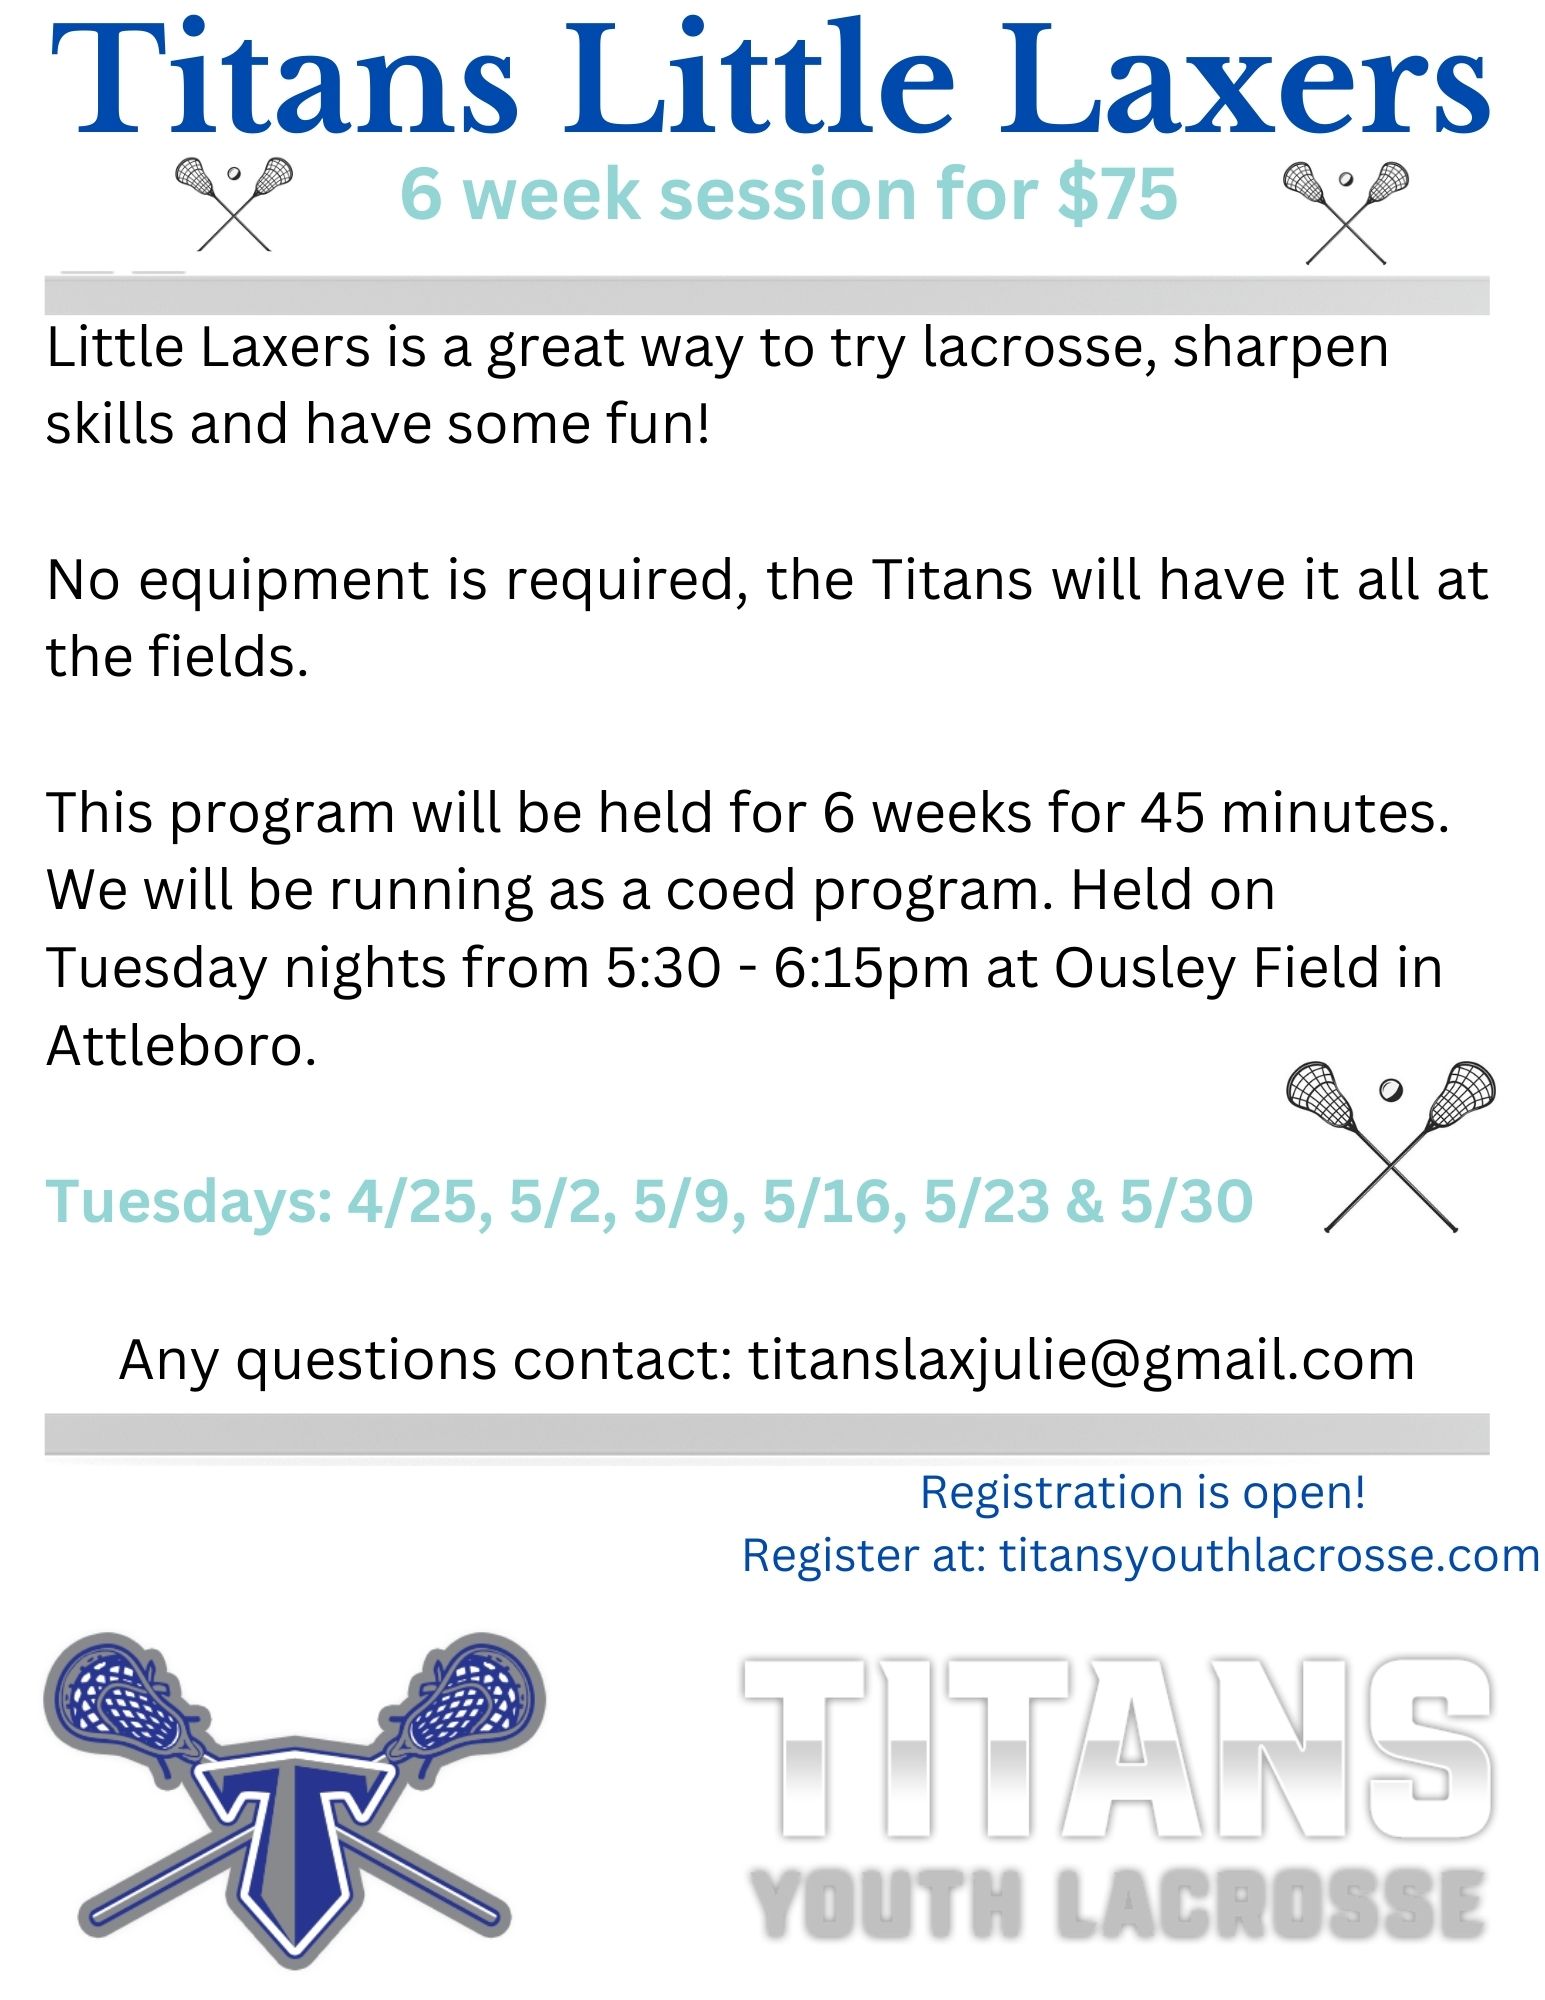 Spring Little Laxers - Registration is OPEN!!!